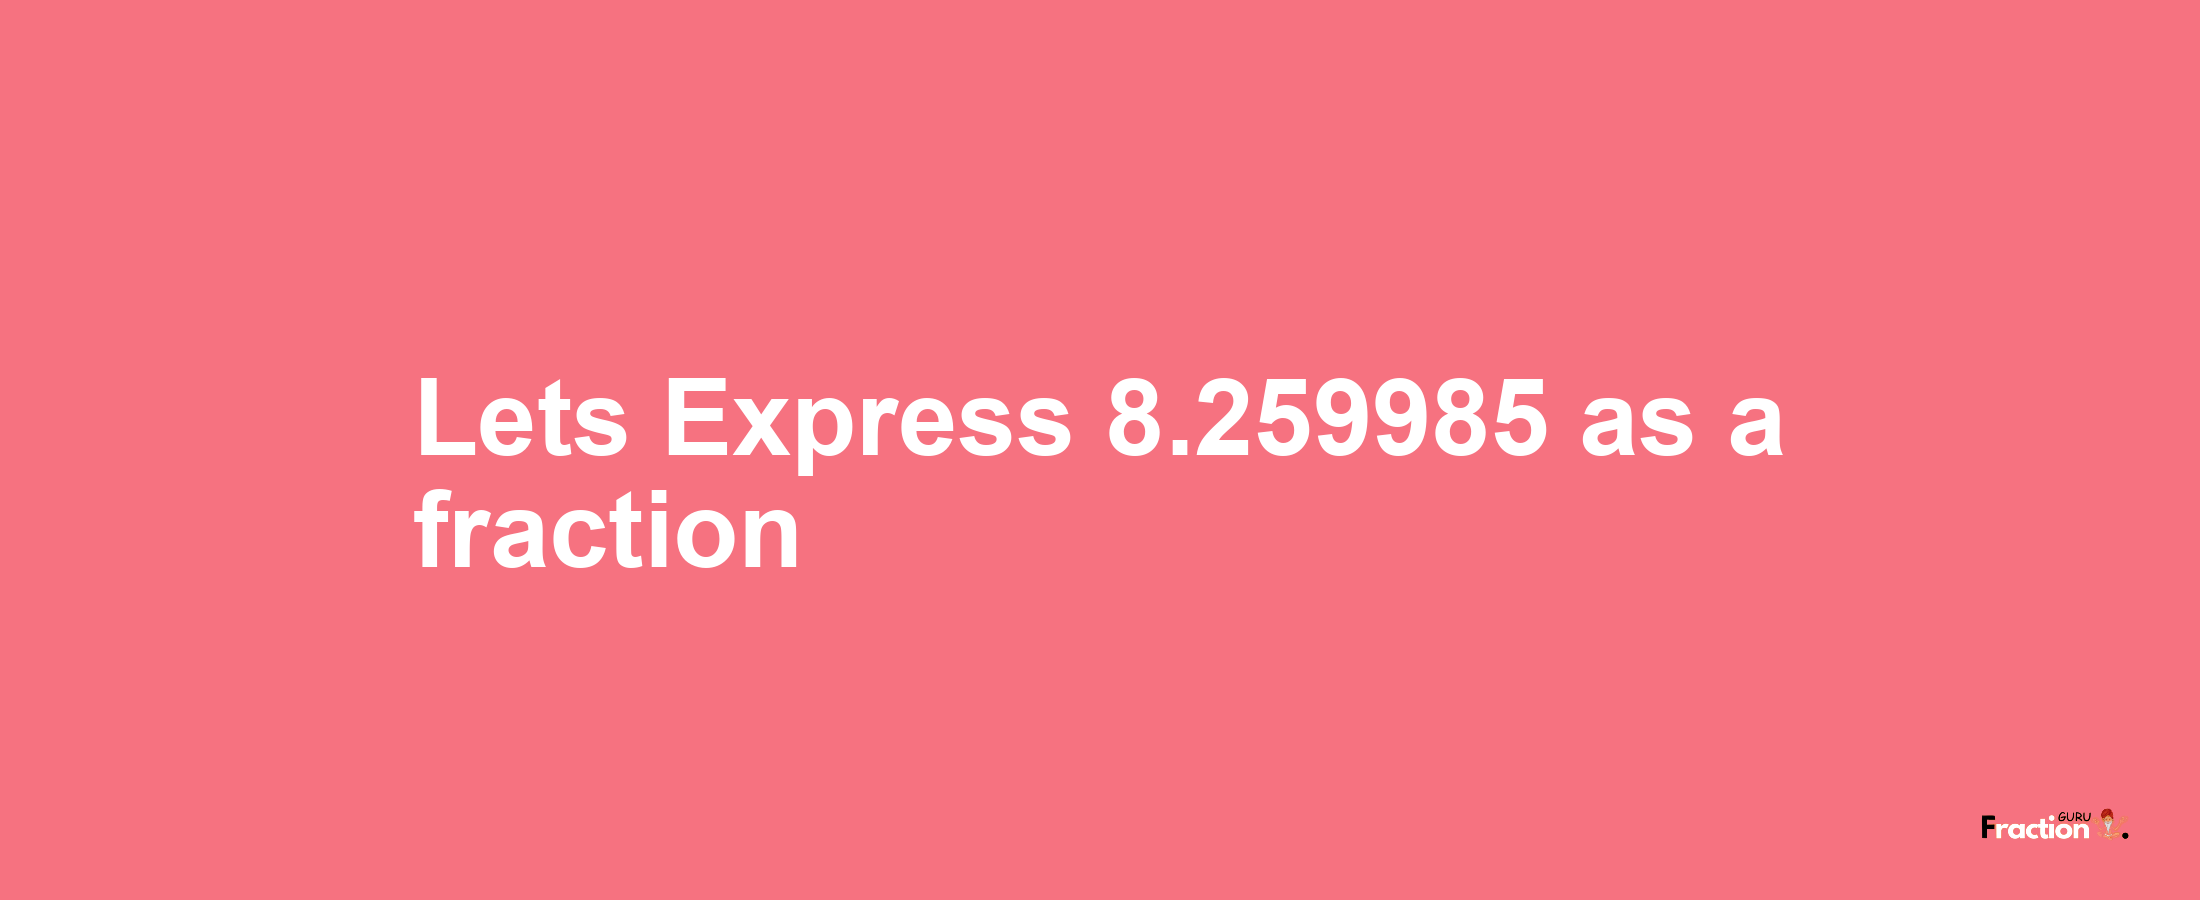 Lets Express 8.259985 as afraction